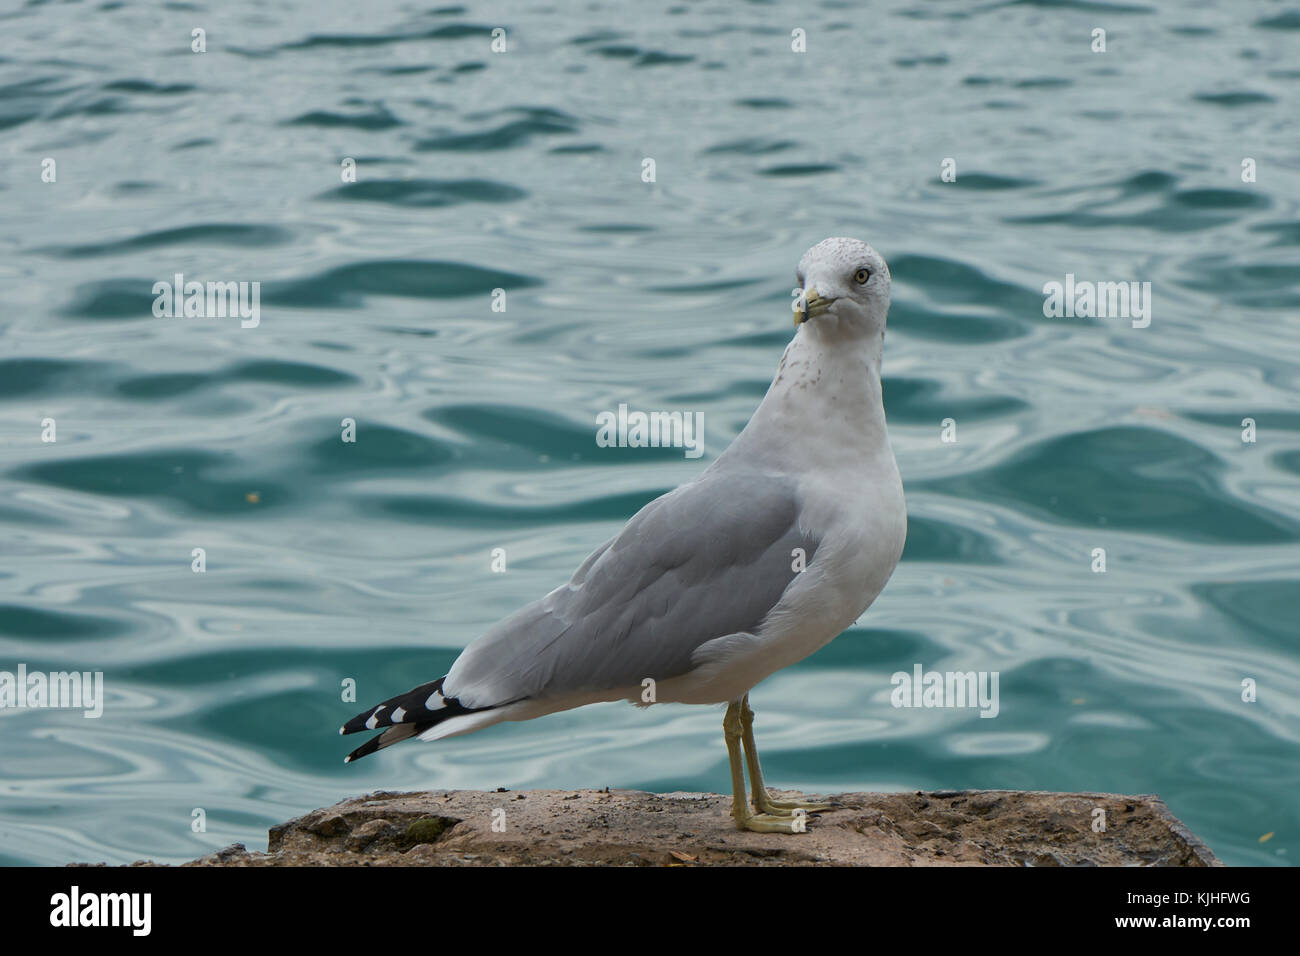 close-up profile view gray and white seagull with black and white patterned tail feathers,  perched on rock with blue-green water in background Stock Photo